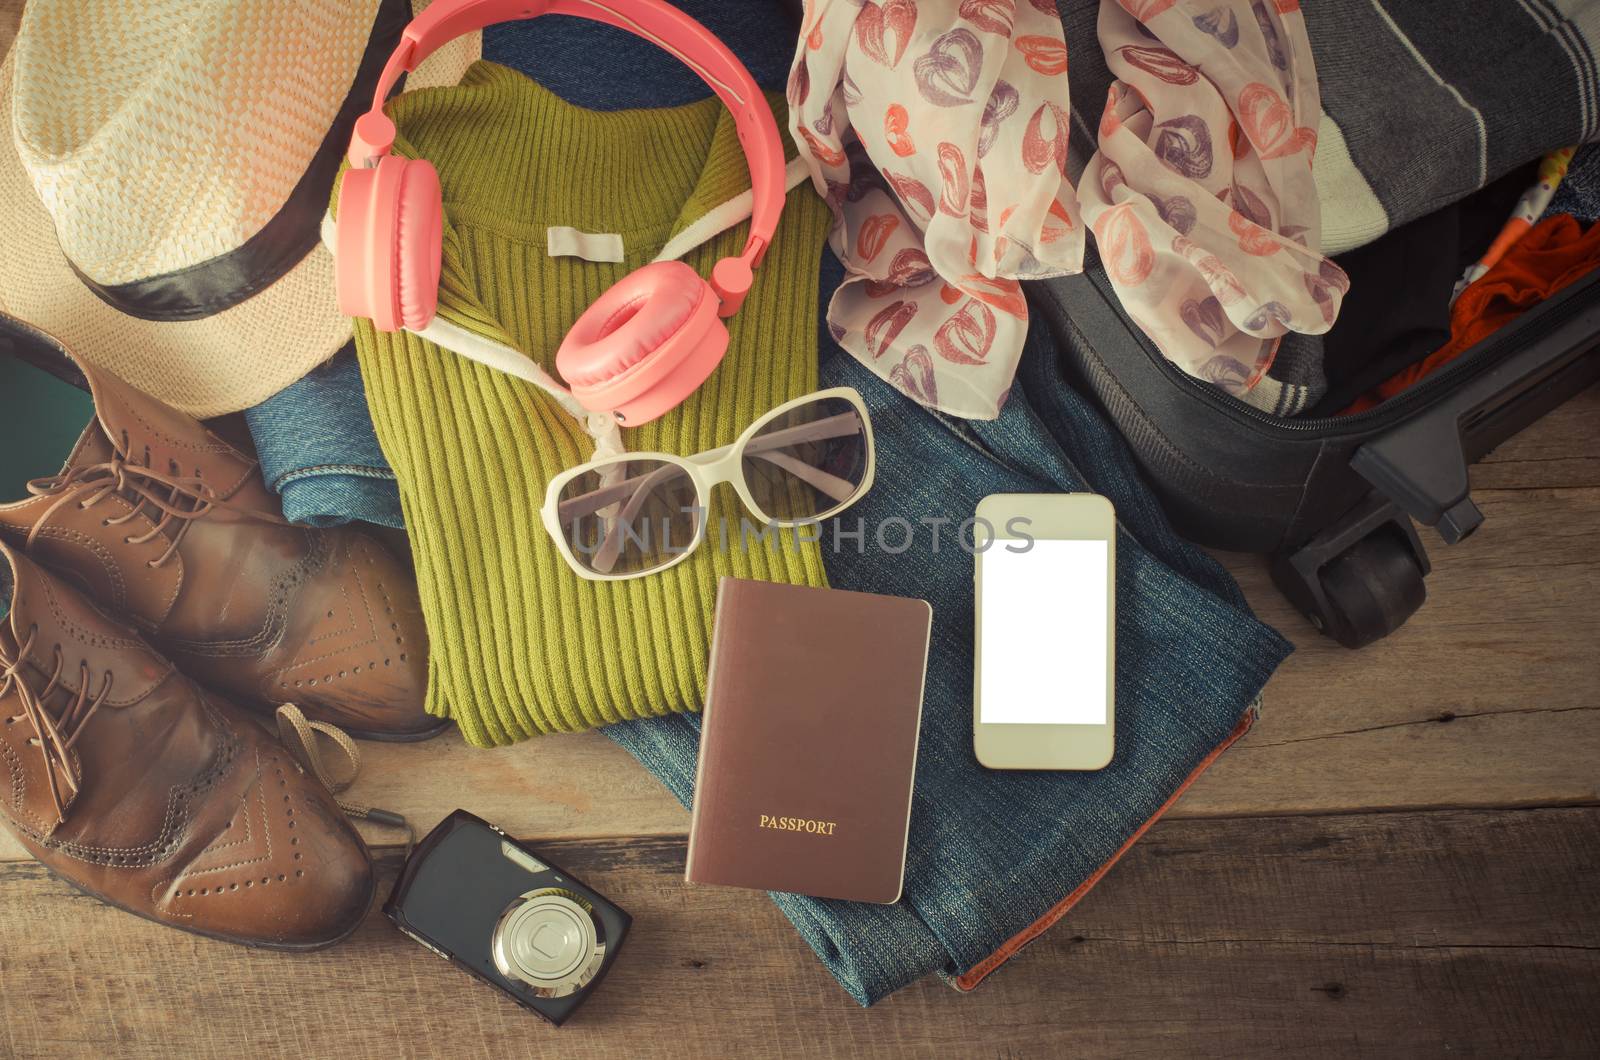 Travel accessories, clothes Wallet, glasses, phone headset. Passport, shoes. Ready for travel by photobyphotoboy